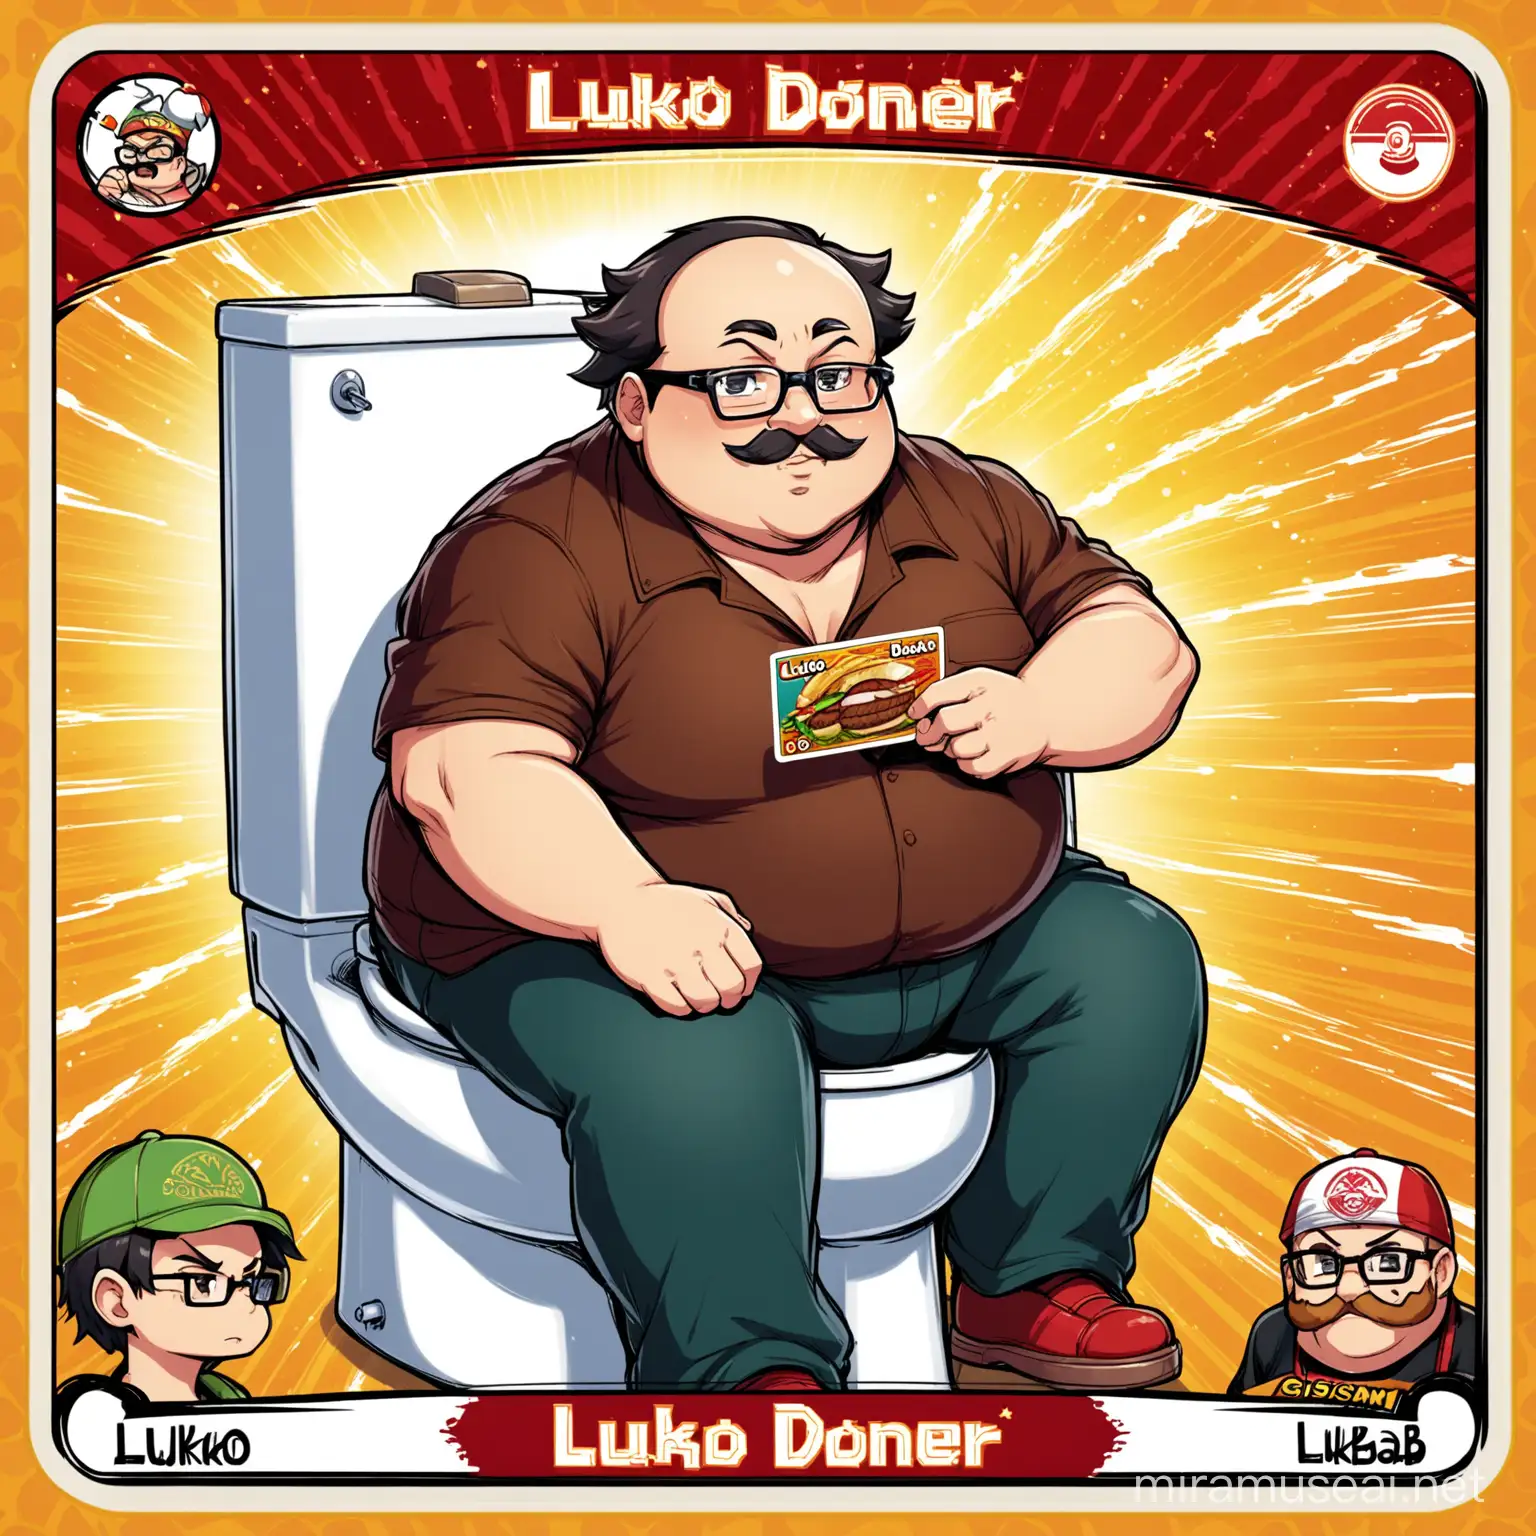 make a pokemon-like collectible card of a dark-haired, chubby, balding, slavic man wearing glasses. Have him sitting on toilet. Card name is the GISman and move set is 'toilet blast' and 'Luko Doner Kebab'.